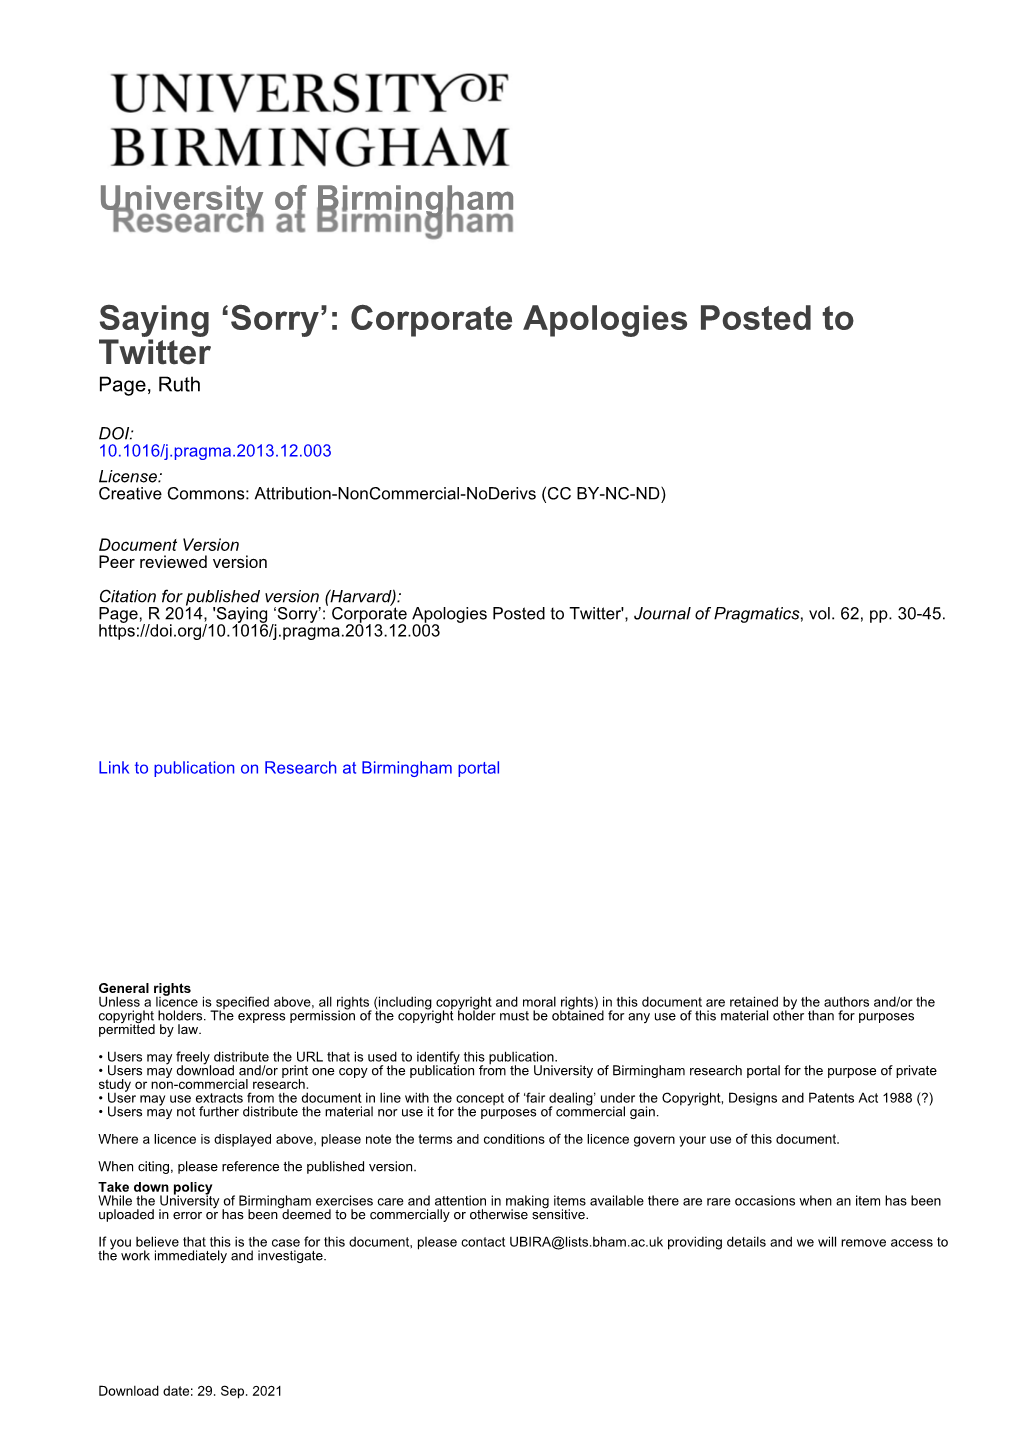 Saying 'Sorry': Corporate Apologies Posted to Twitter